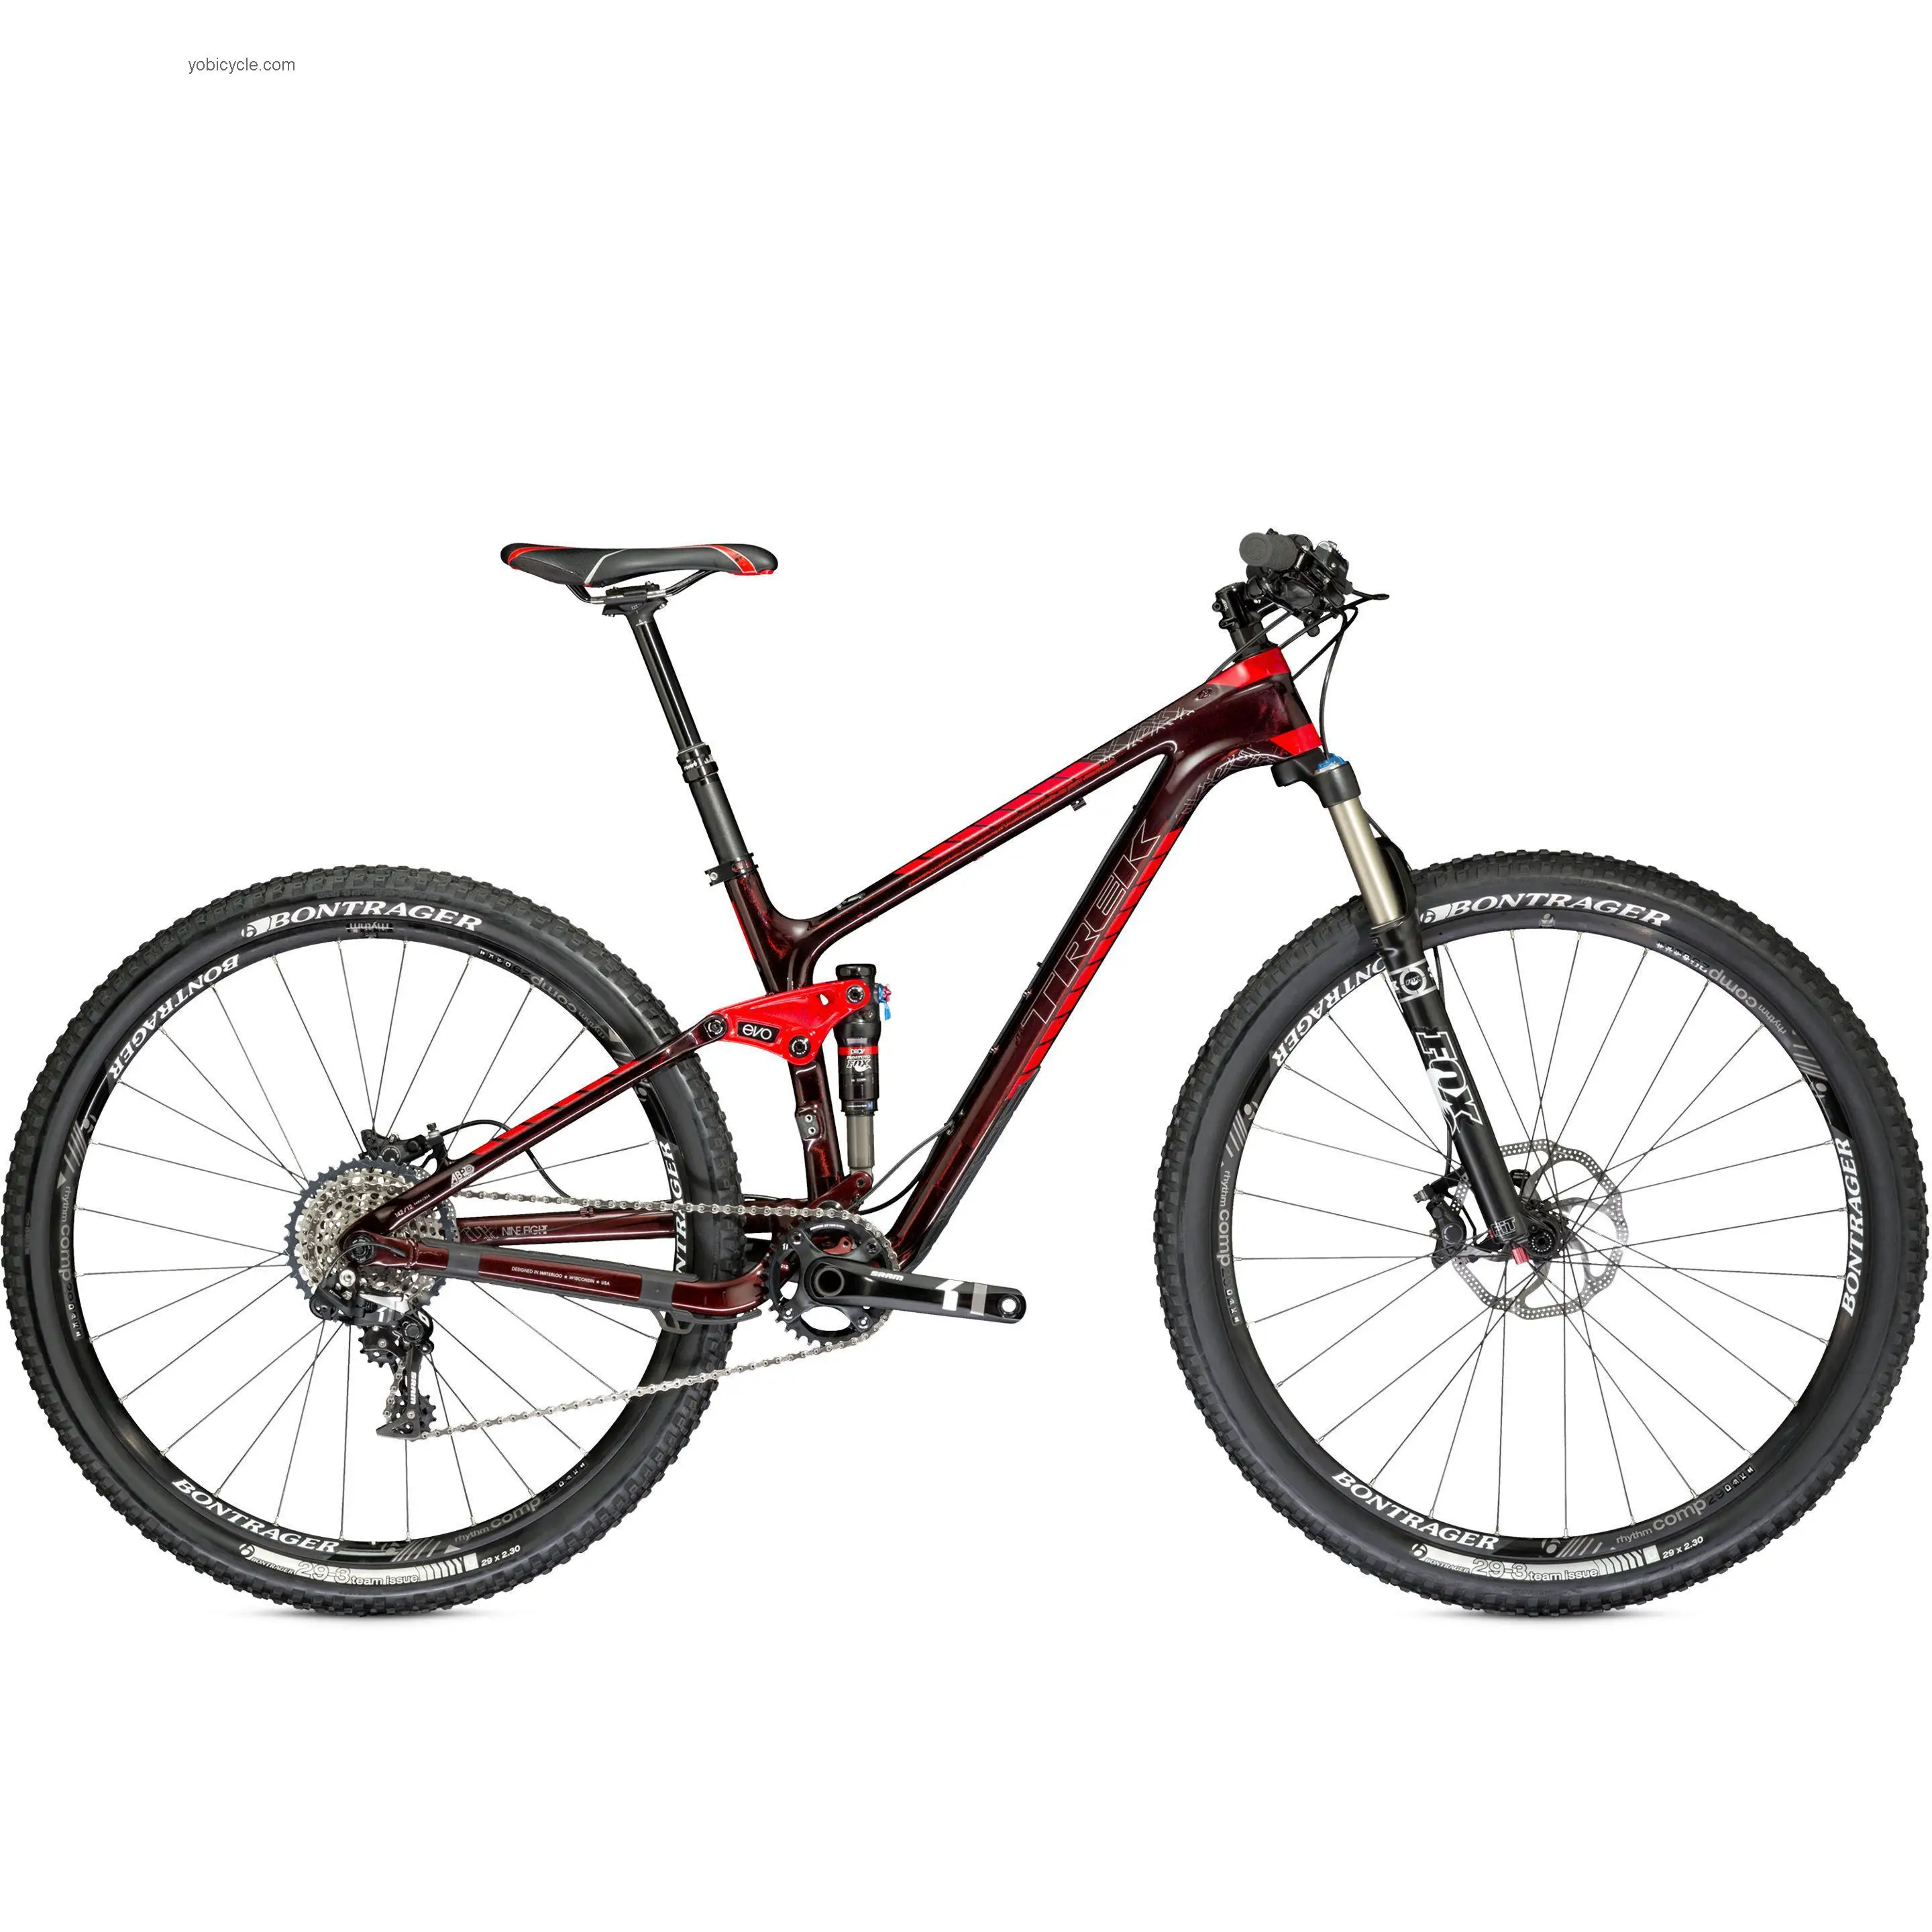 Trek Fuel EX 9.8 29 X01 competitors and comparison tool online specs and performance